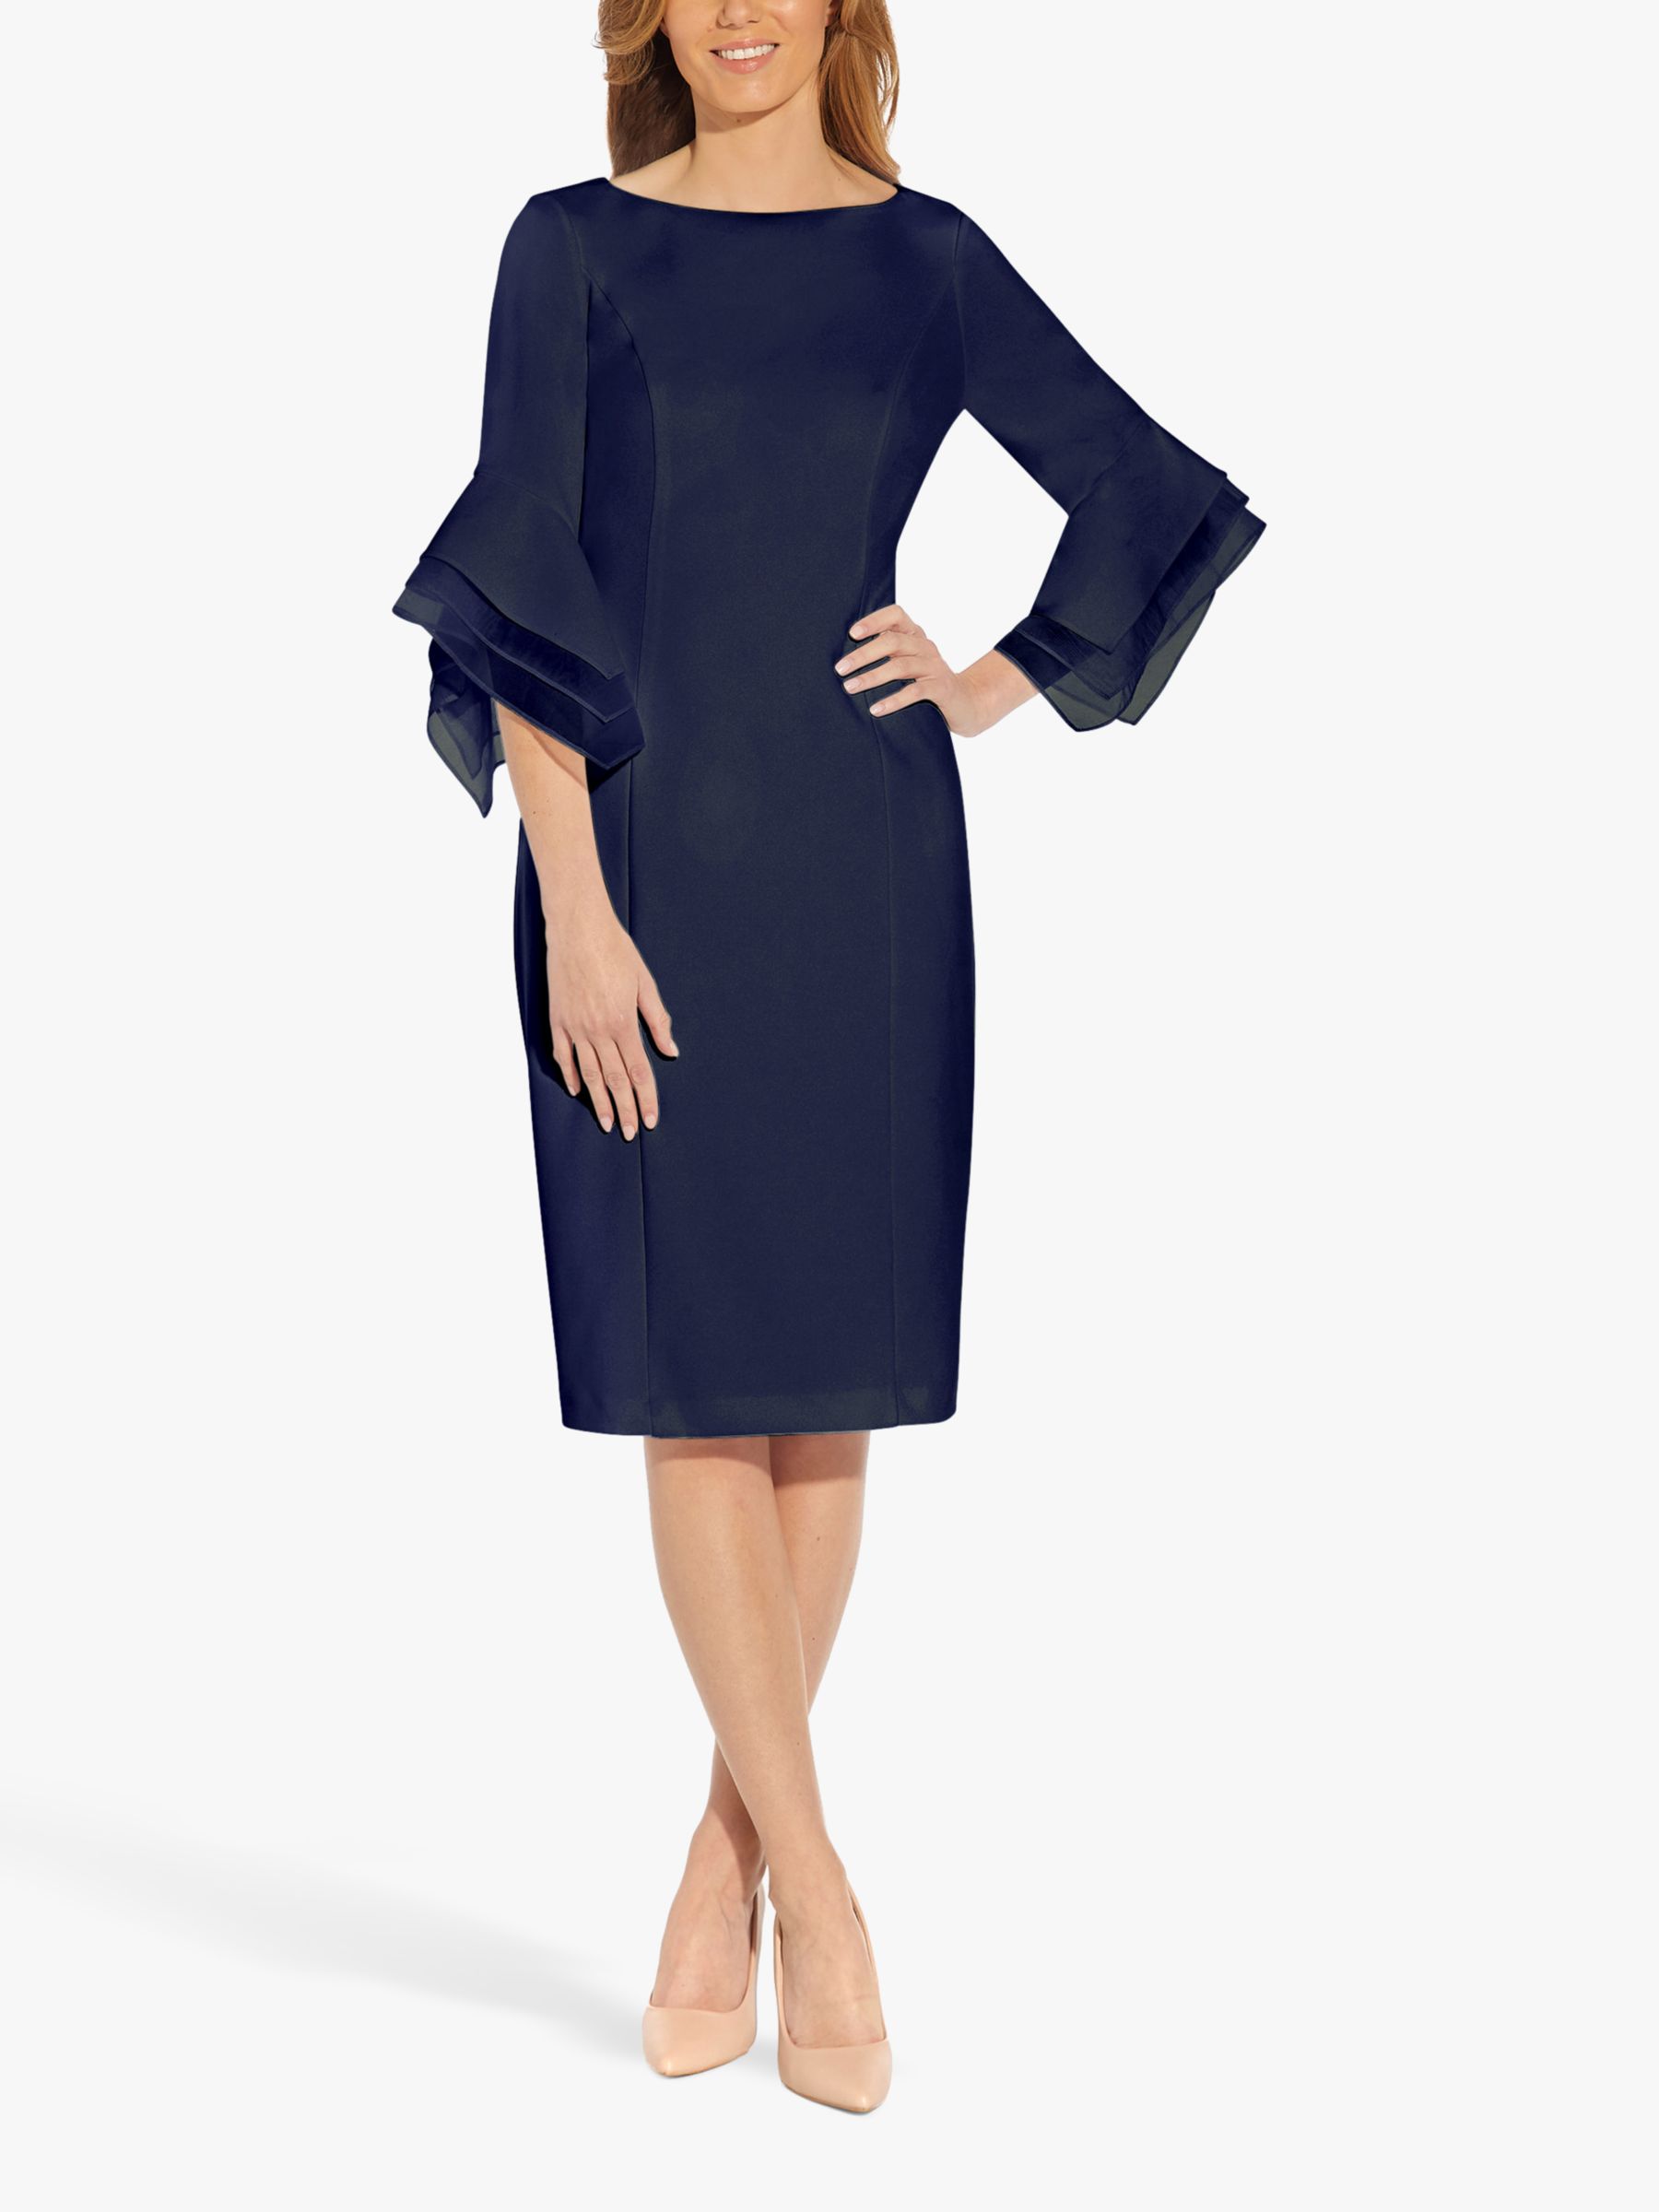 Adrianna Papell Crepe Tailored Dress, Navy at John Lewis & Partners